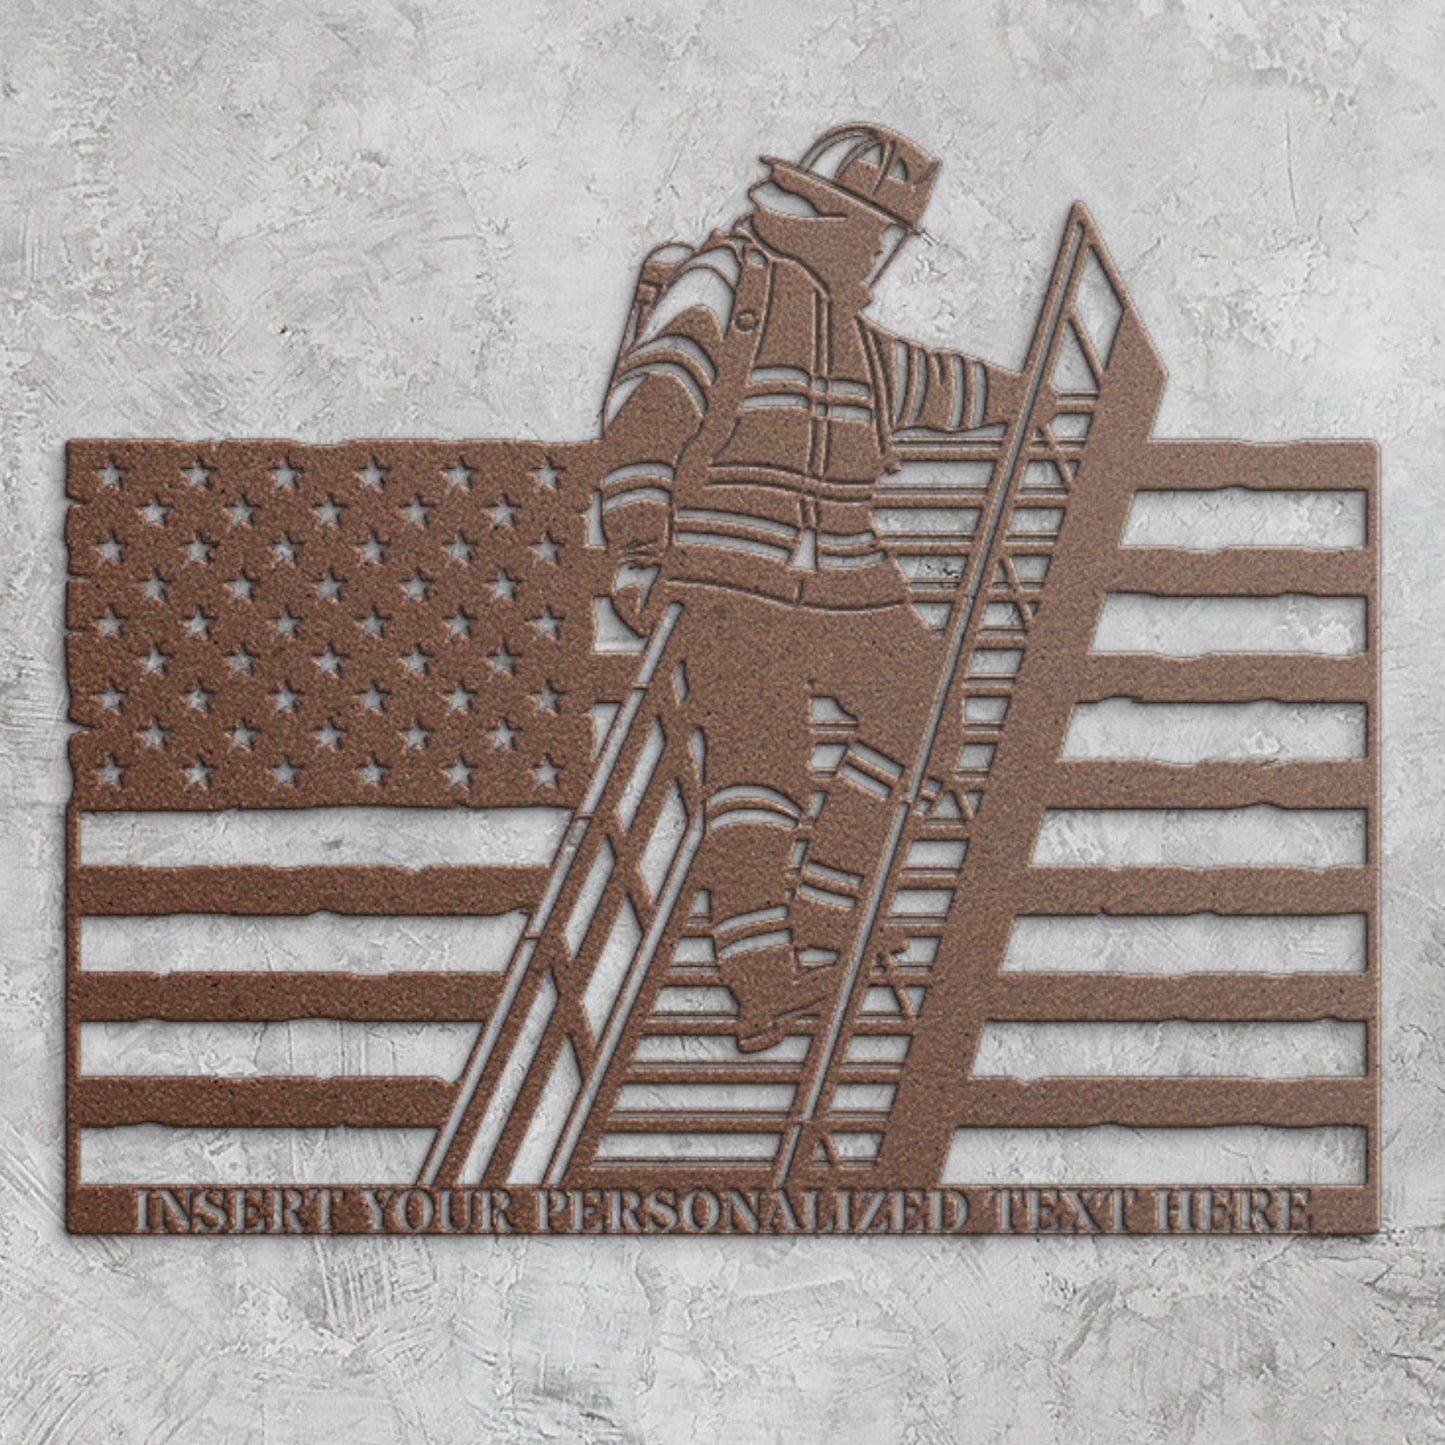 Personalized American Firefighter Metal Sign. Custom US Fireman Wall Decor Gift. Unique Firefighter Volunteer. Fire Department Wall Hanging